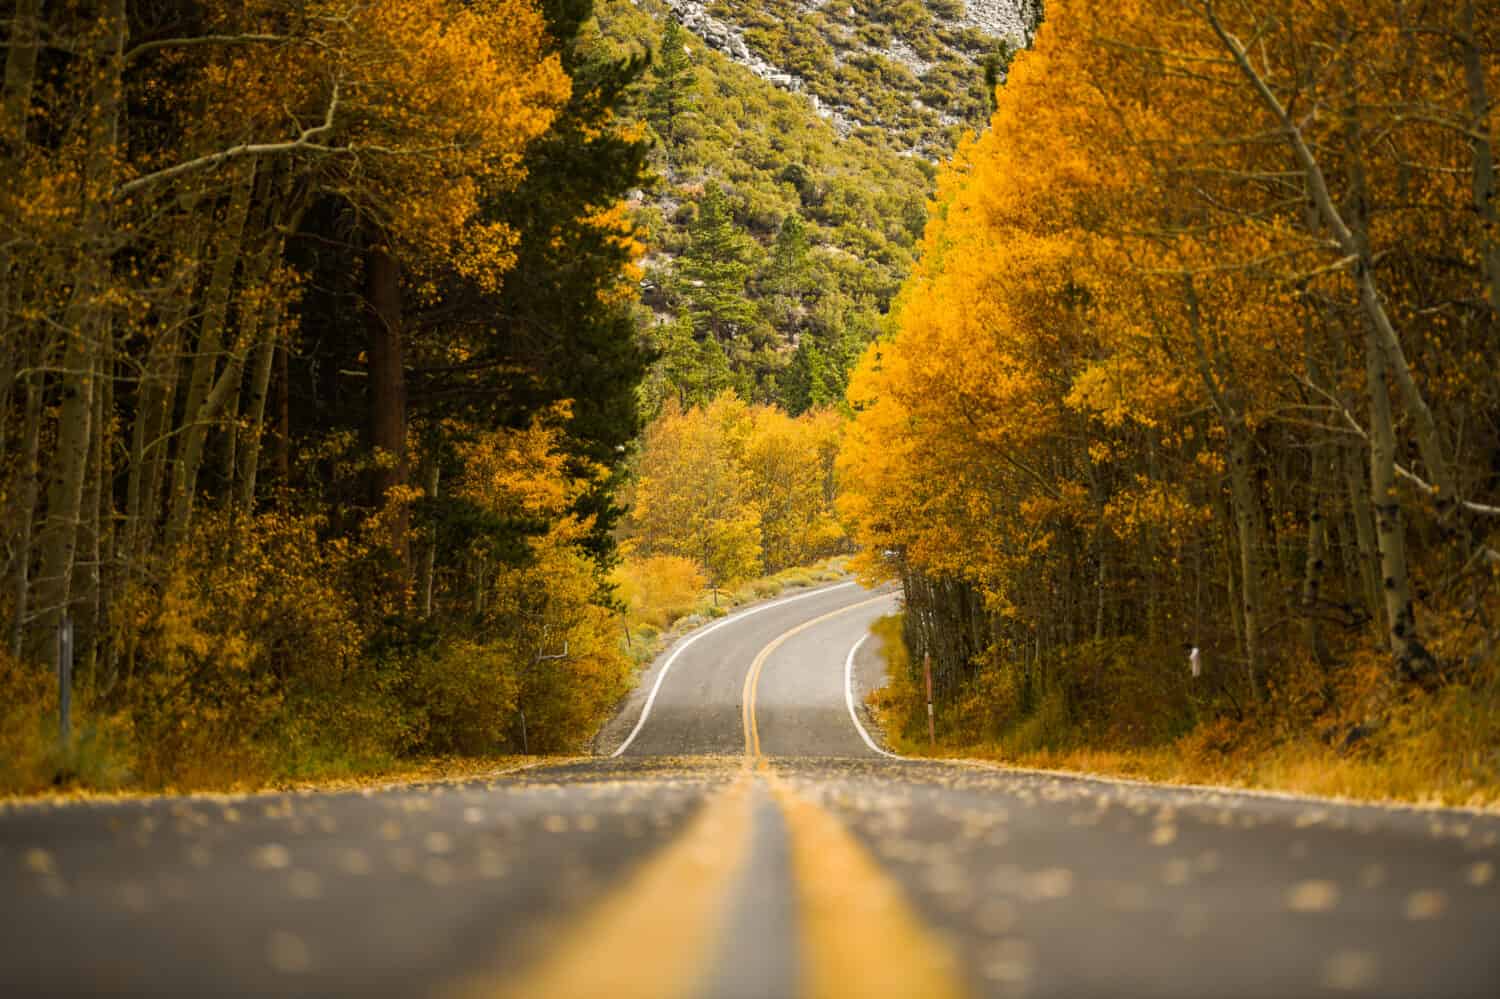 Fall road during autumn at June Lake, California with yellow aspen trees, view of road, falling leaves 